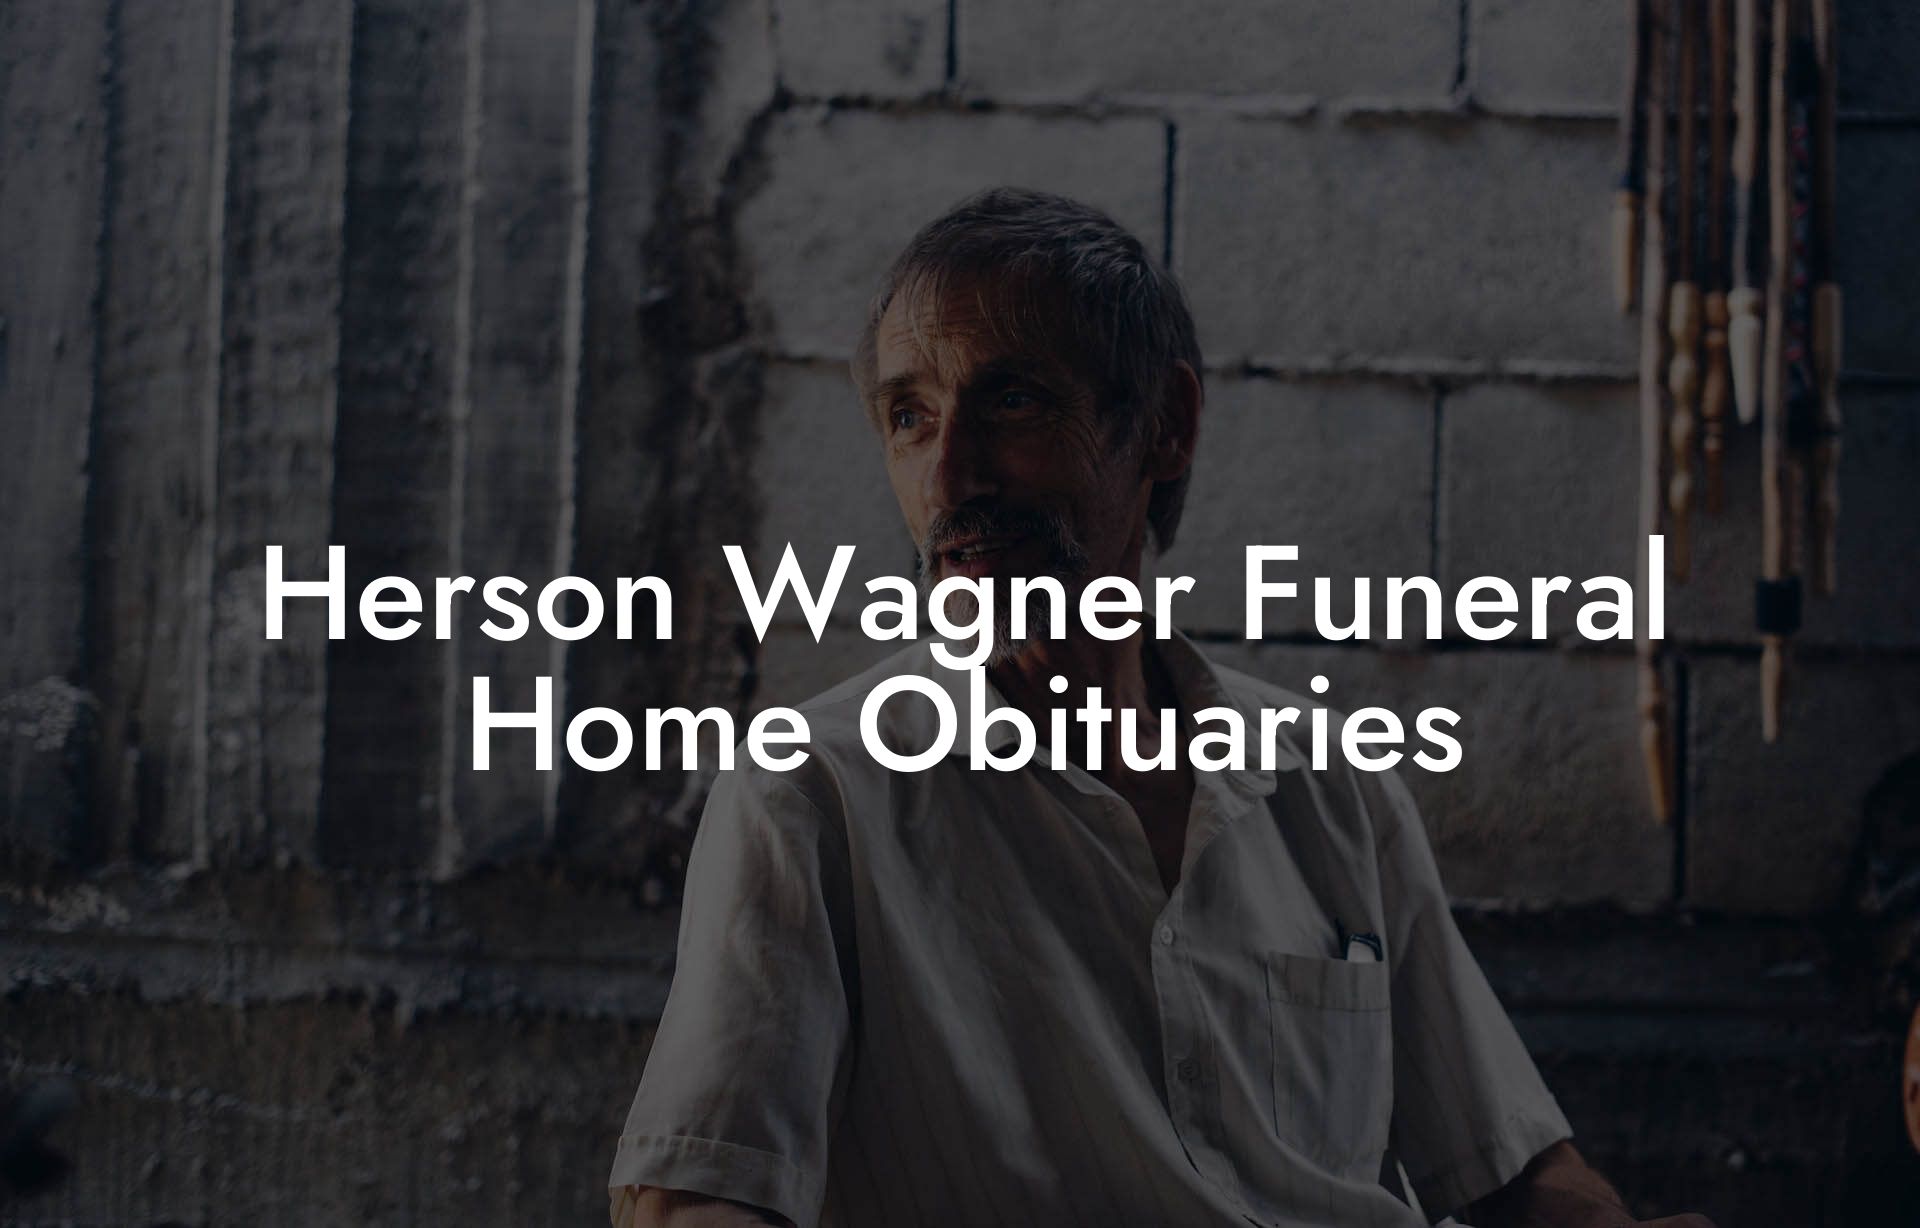 Herson Wagner Funeral Home Obituaries